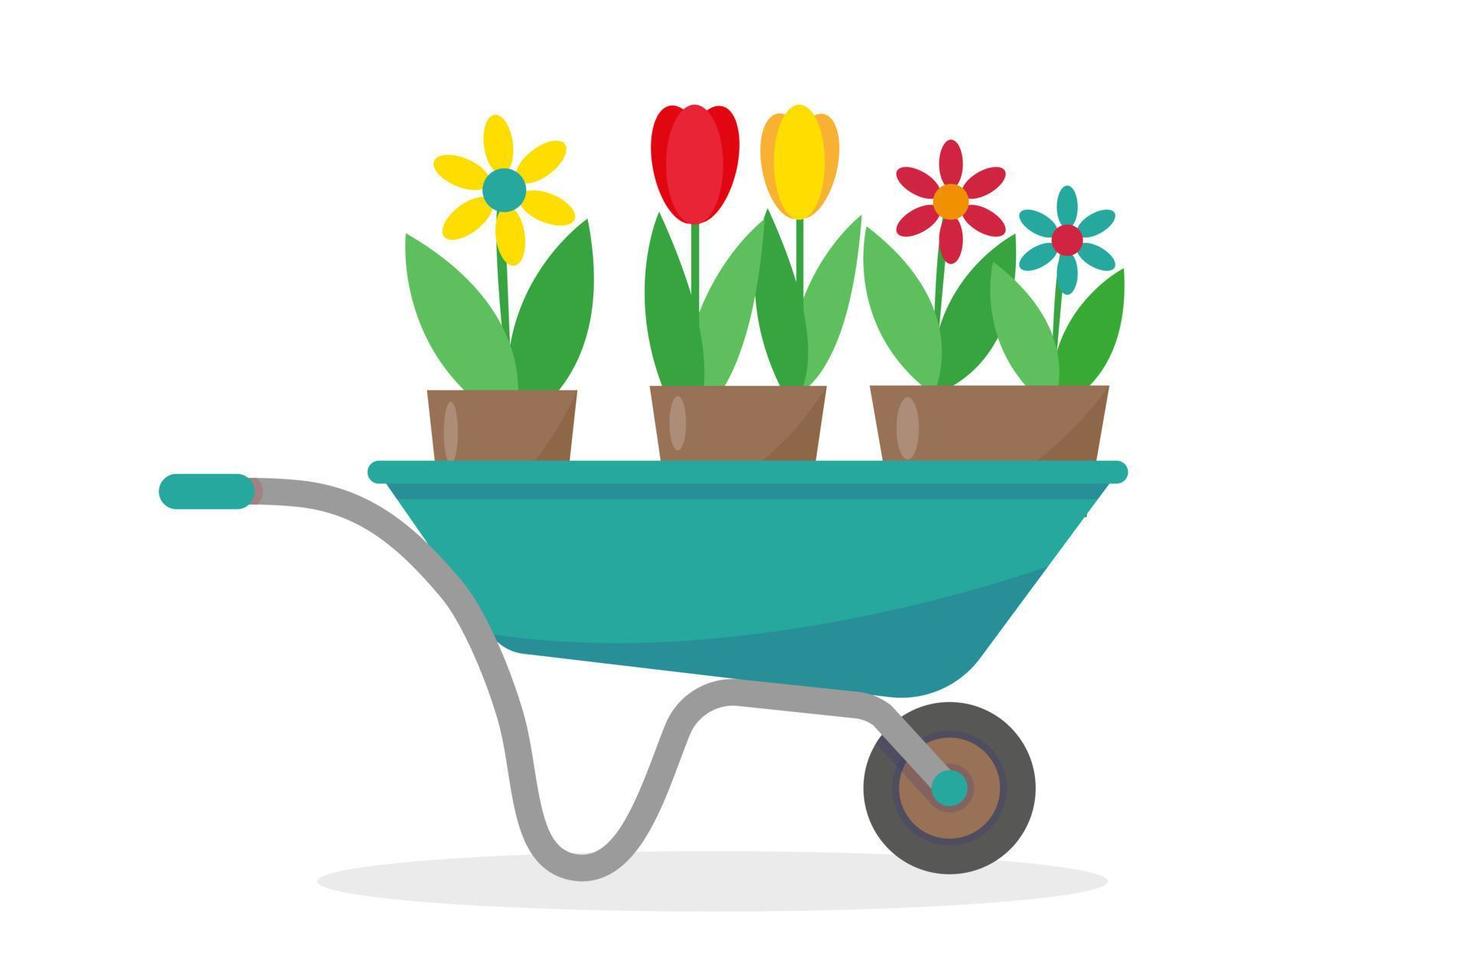 Garden cart with flowers in pots. Spring or summer gardening tools element vector illustration.